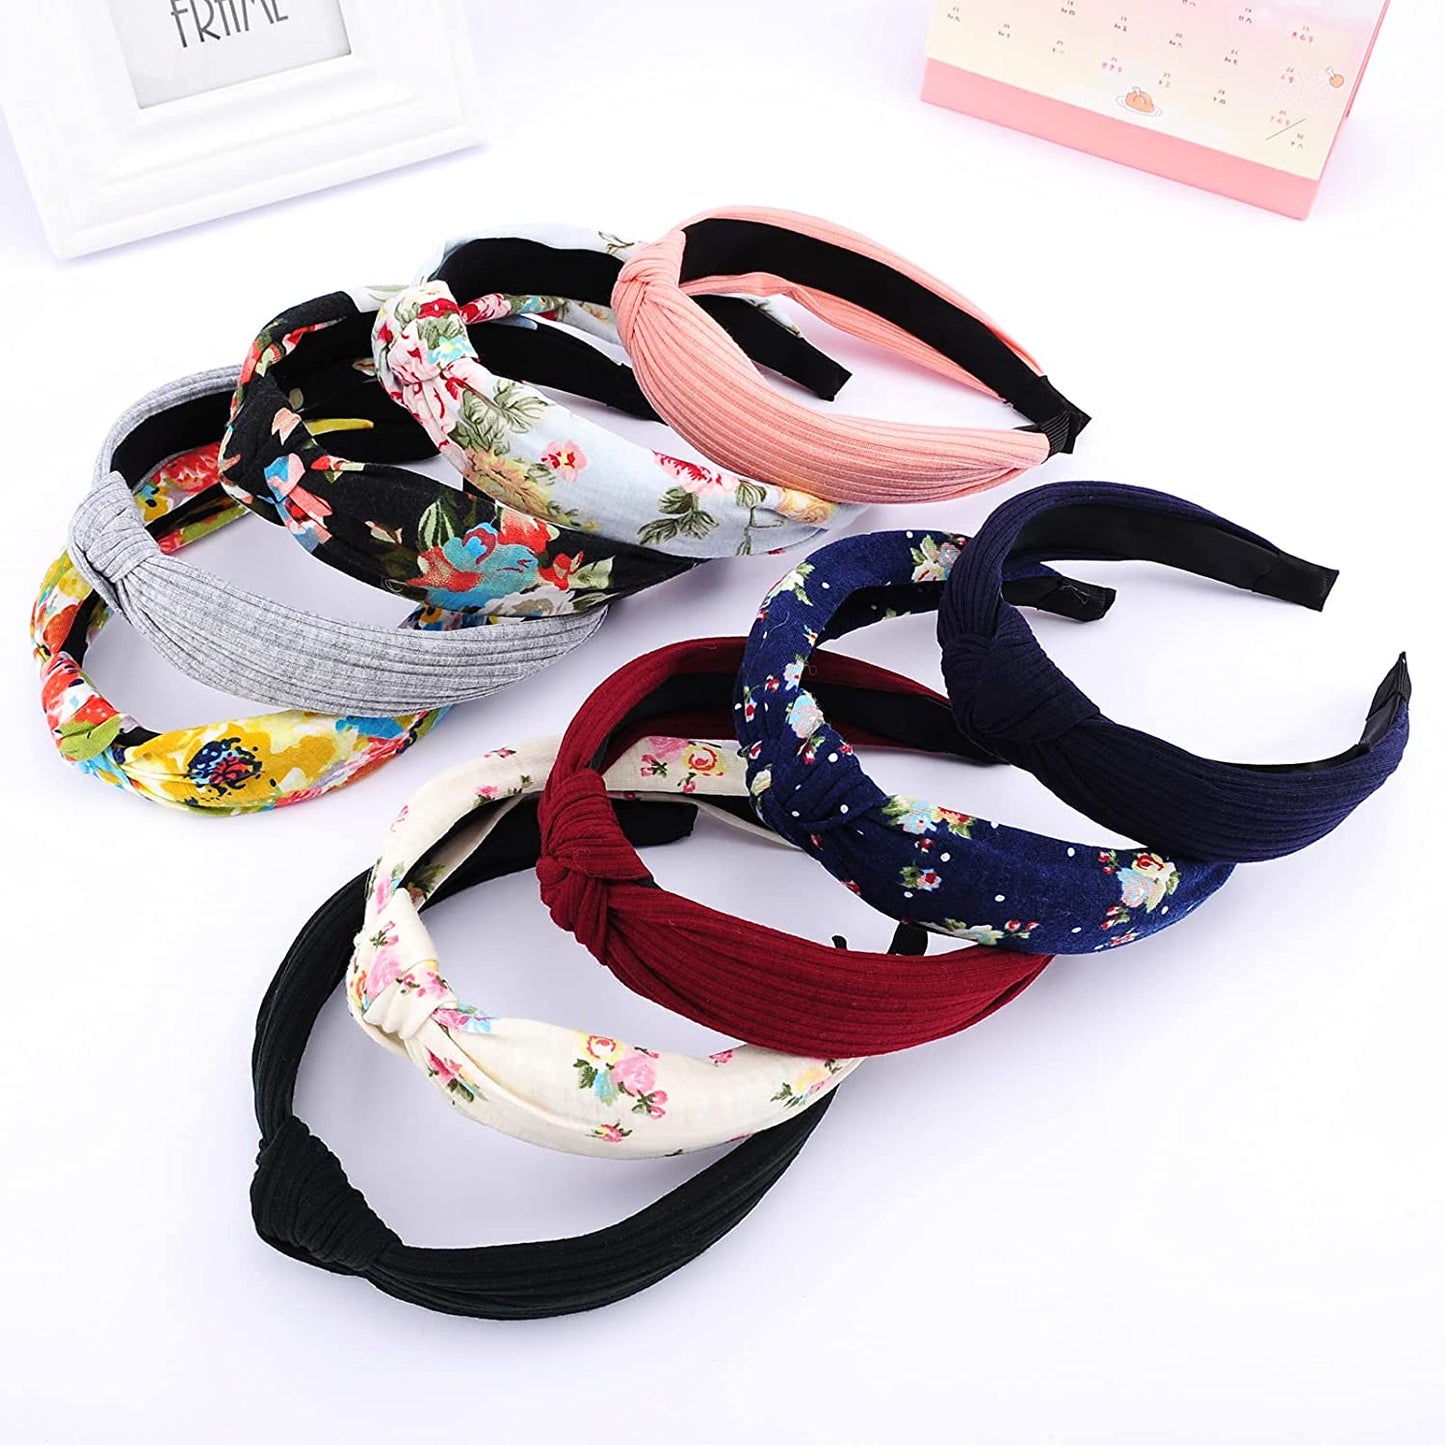 PRINTED KNOT TURBAN HAIRBAND - BY DOUBLE A WEARS